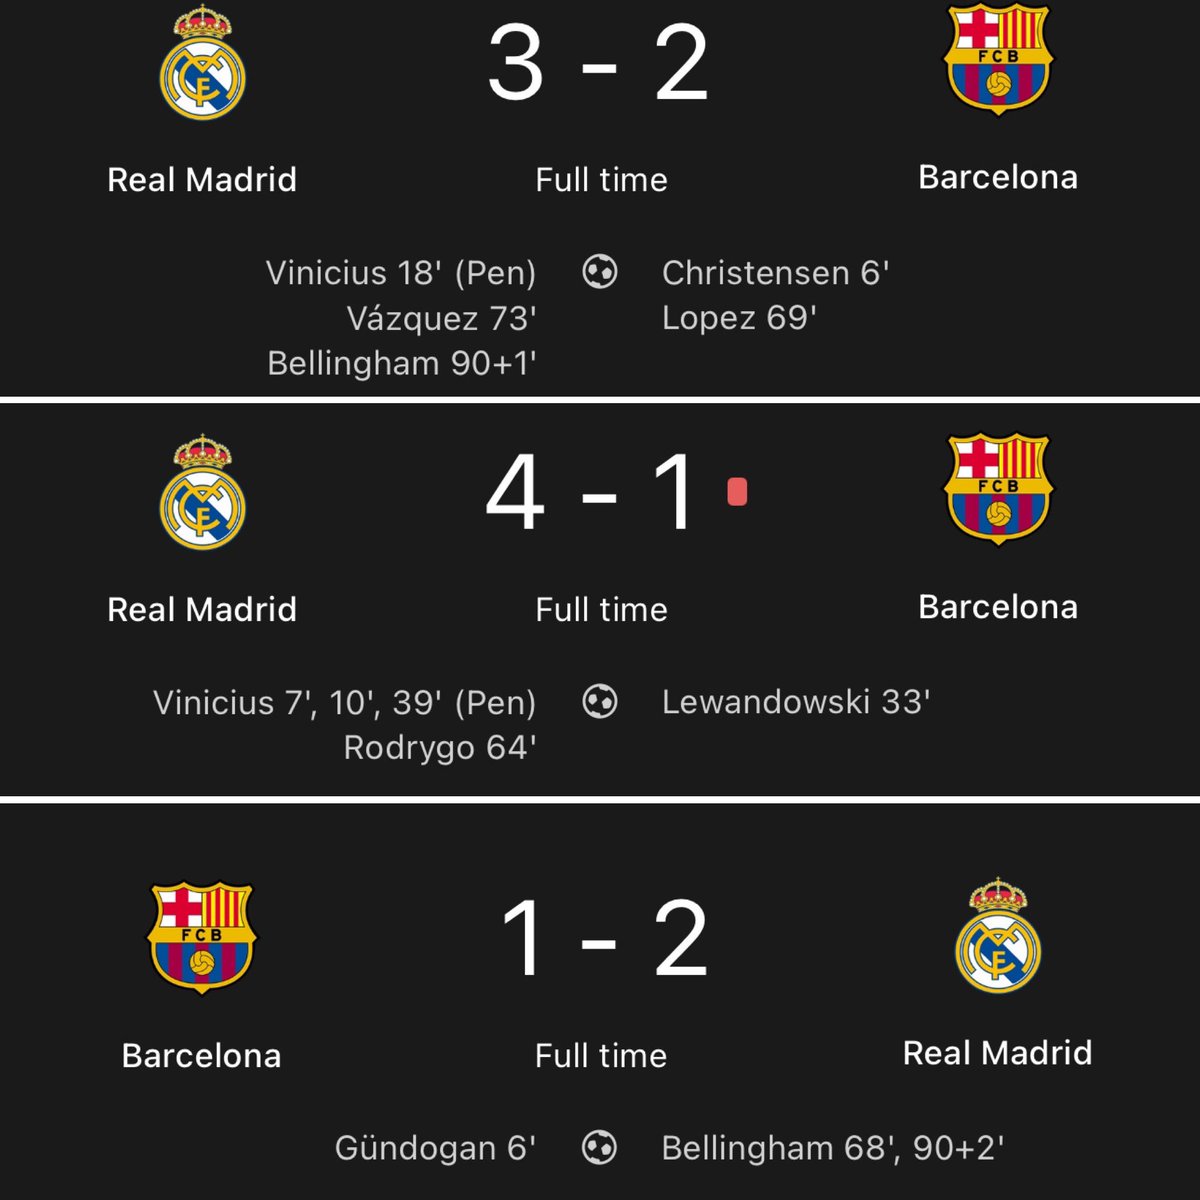 Real Madrid vs Barcelona this season It’s not even a rivalry anymore 😭